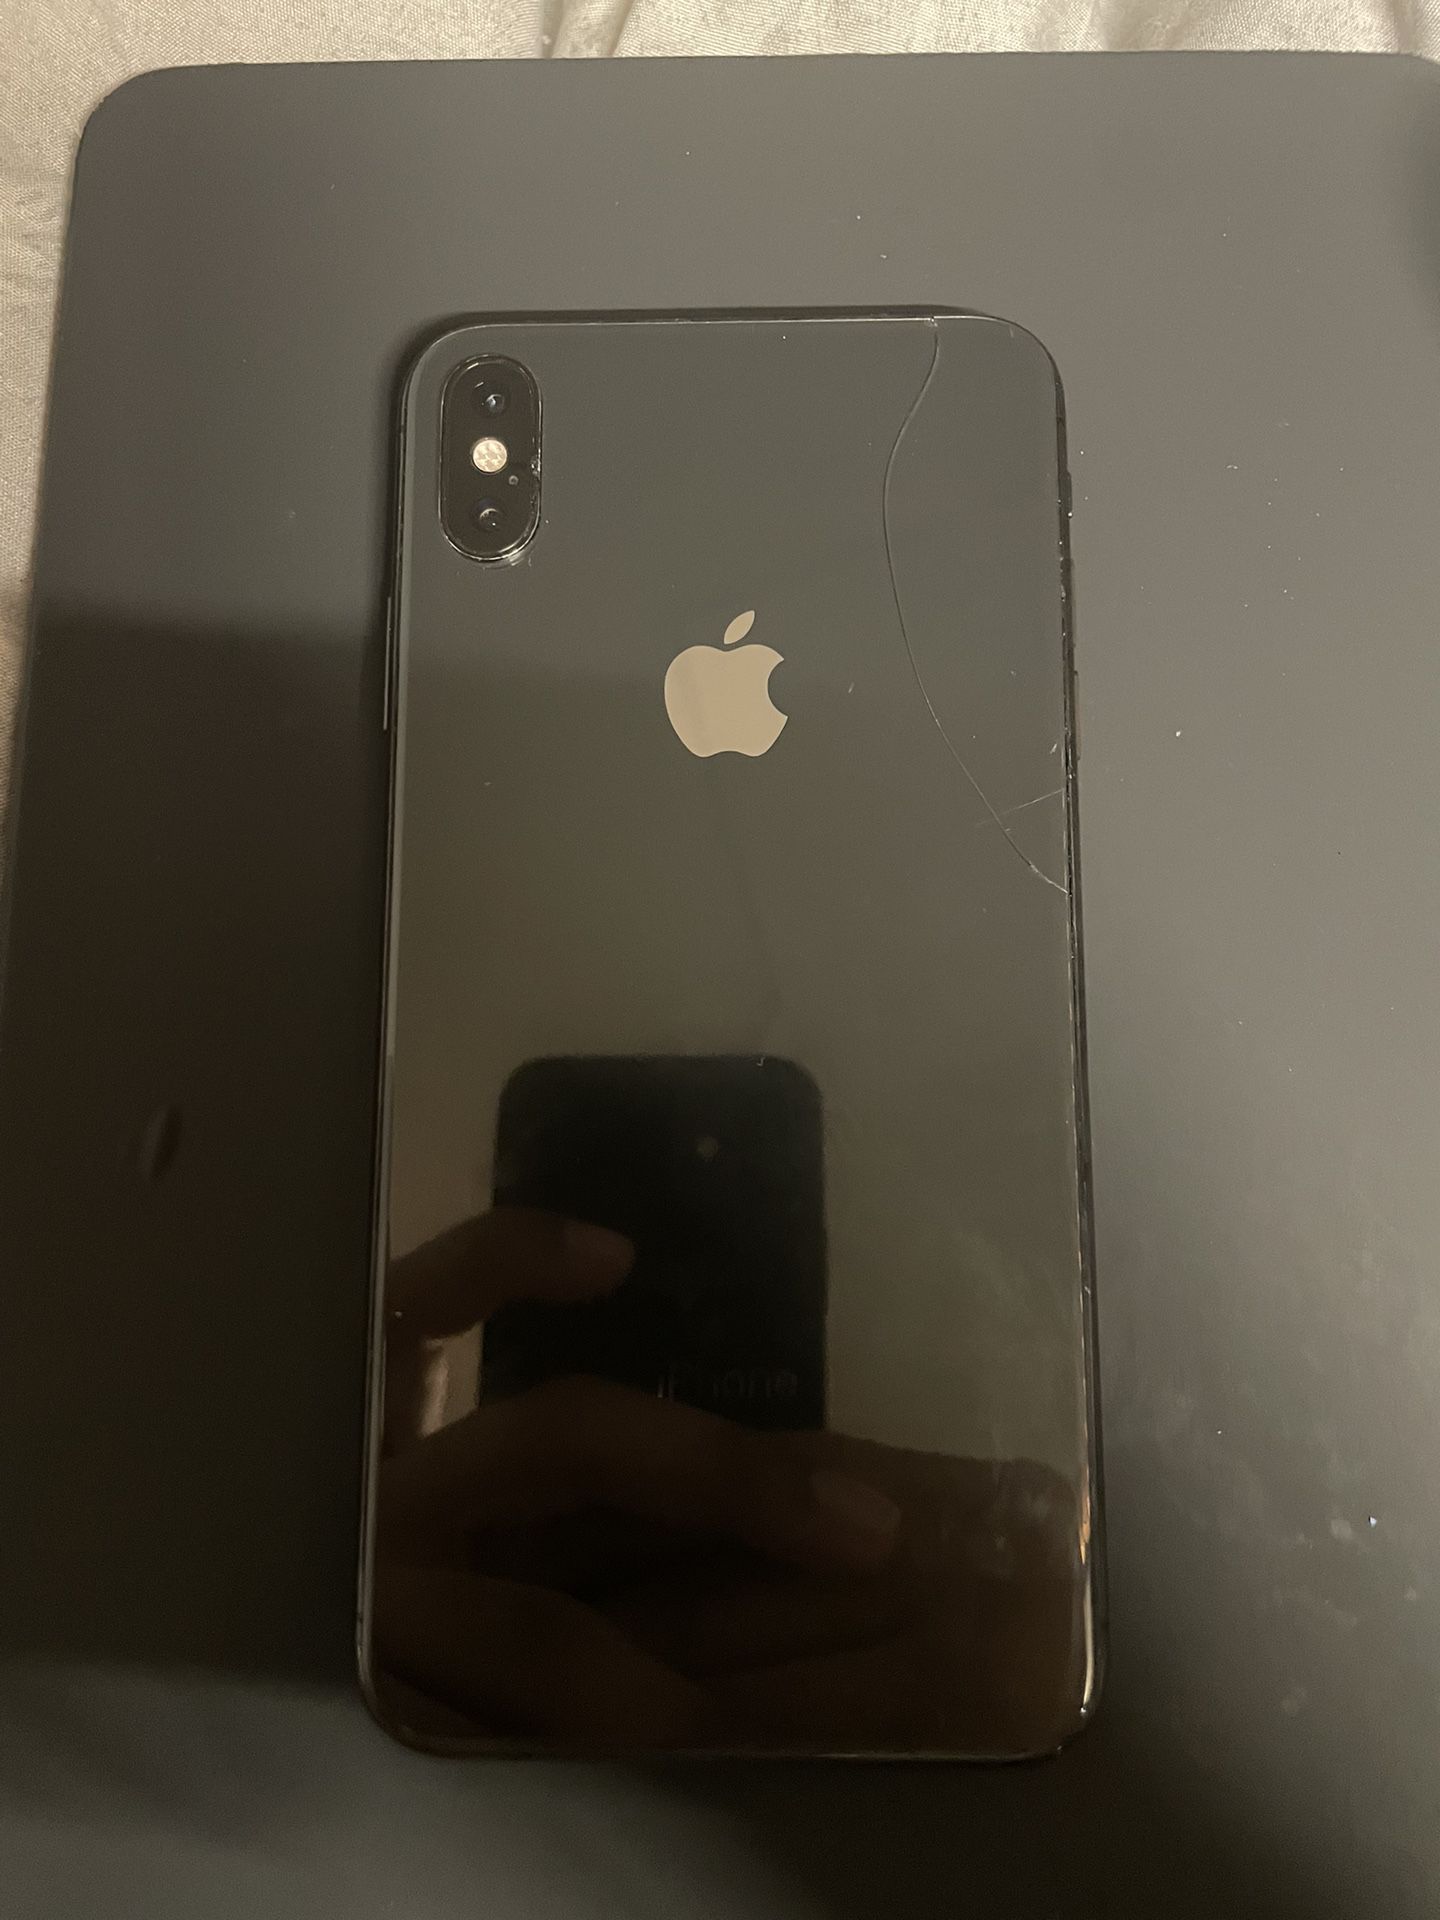 Apple iPhone Xs Max 64GB Space Gray T-mobile 